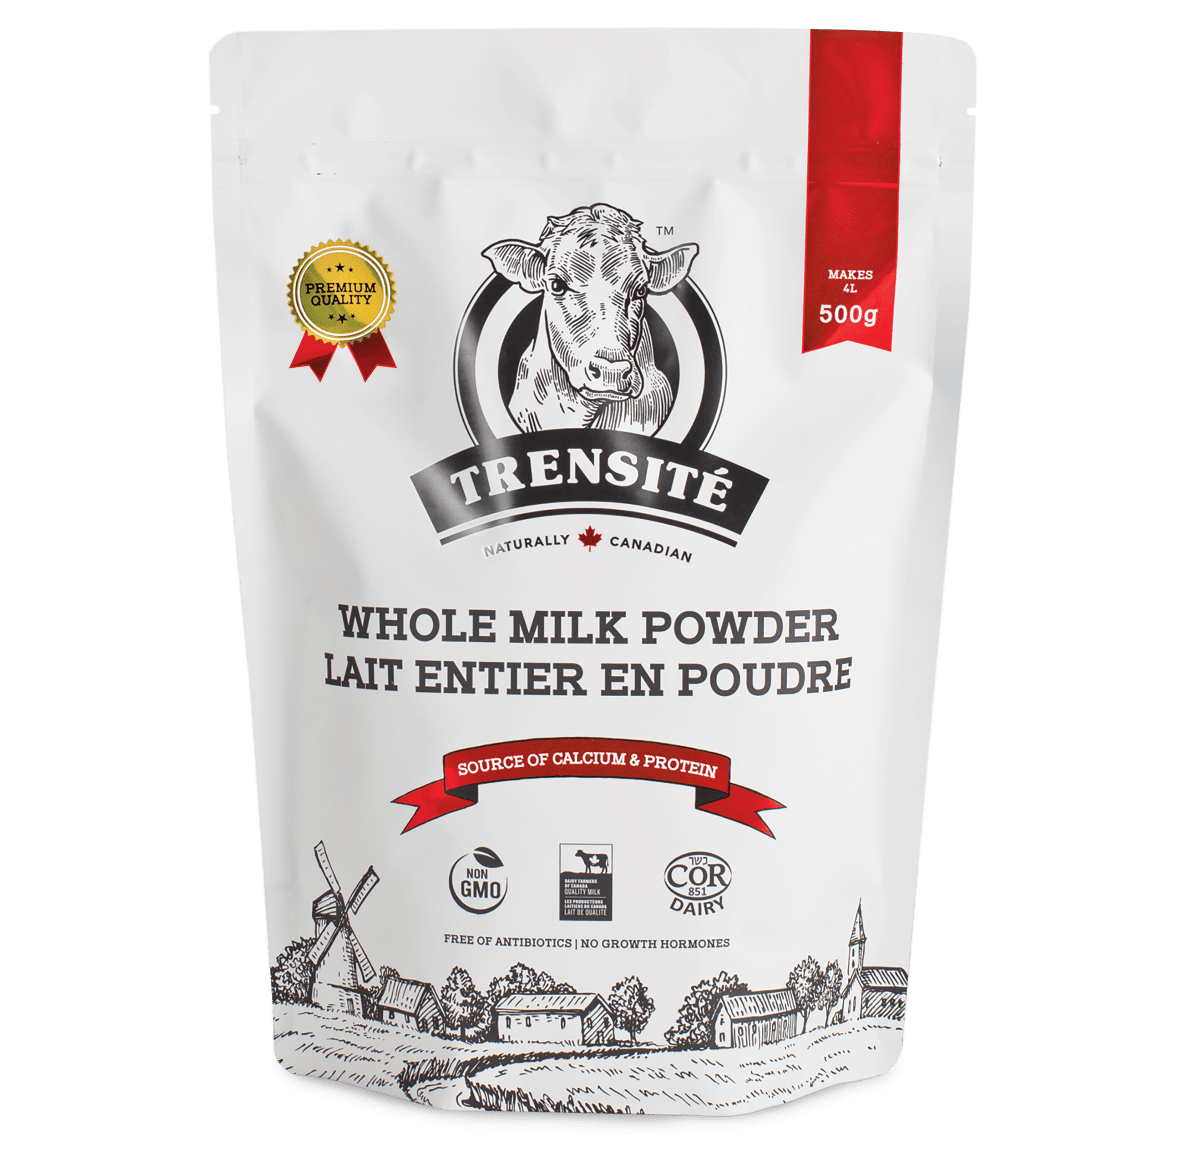 Trensite Dairy Whole Milk Powder Products